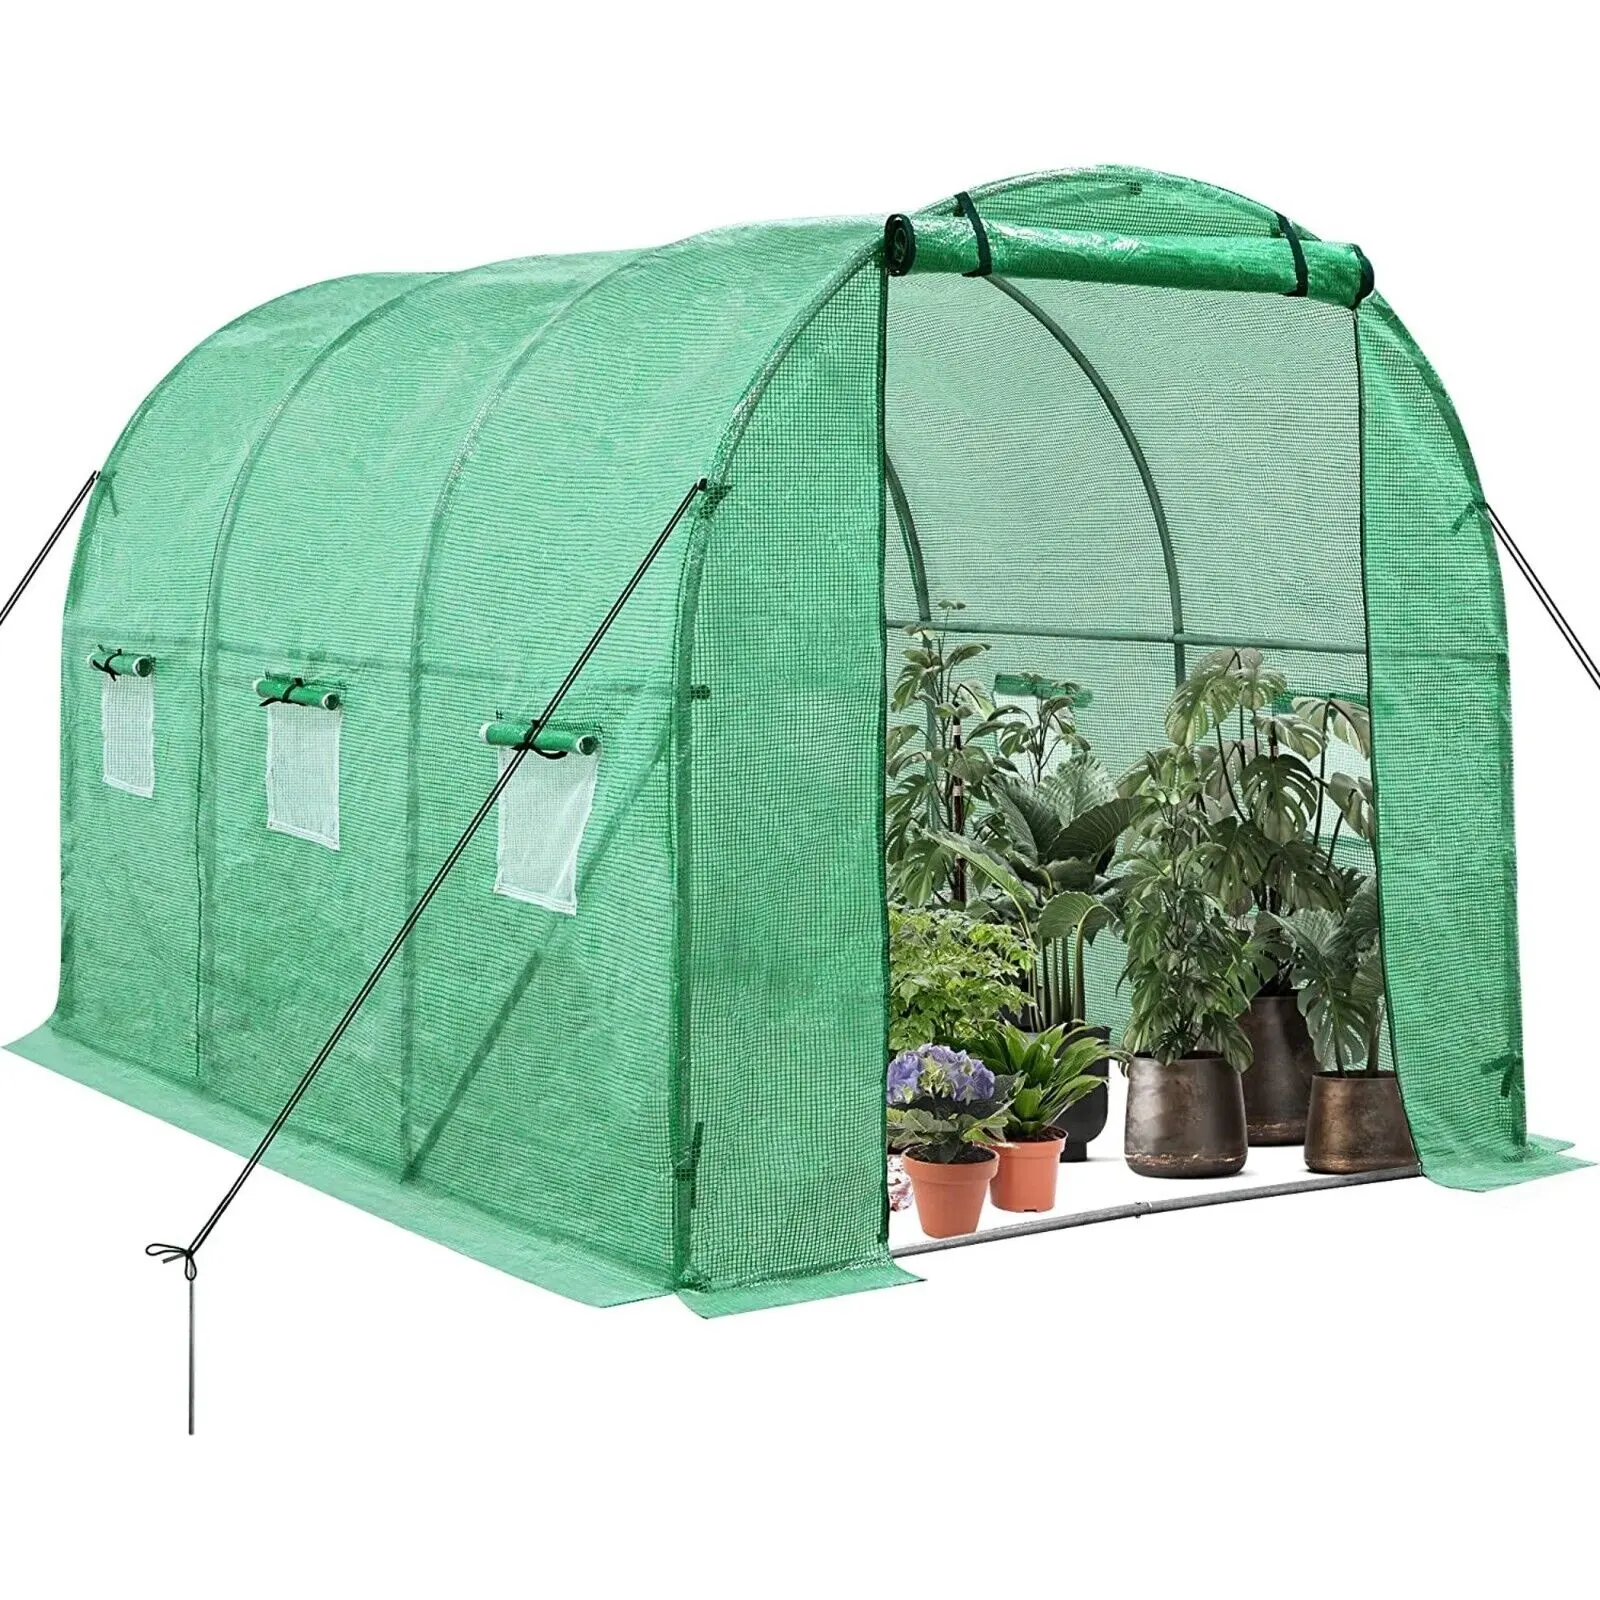 Portable Walking in Greenhouse Large Green Garden Winter Hot House Plants Shed for Outdoors, with 6 windows and roll-up zipper